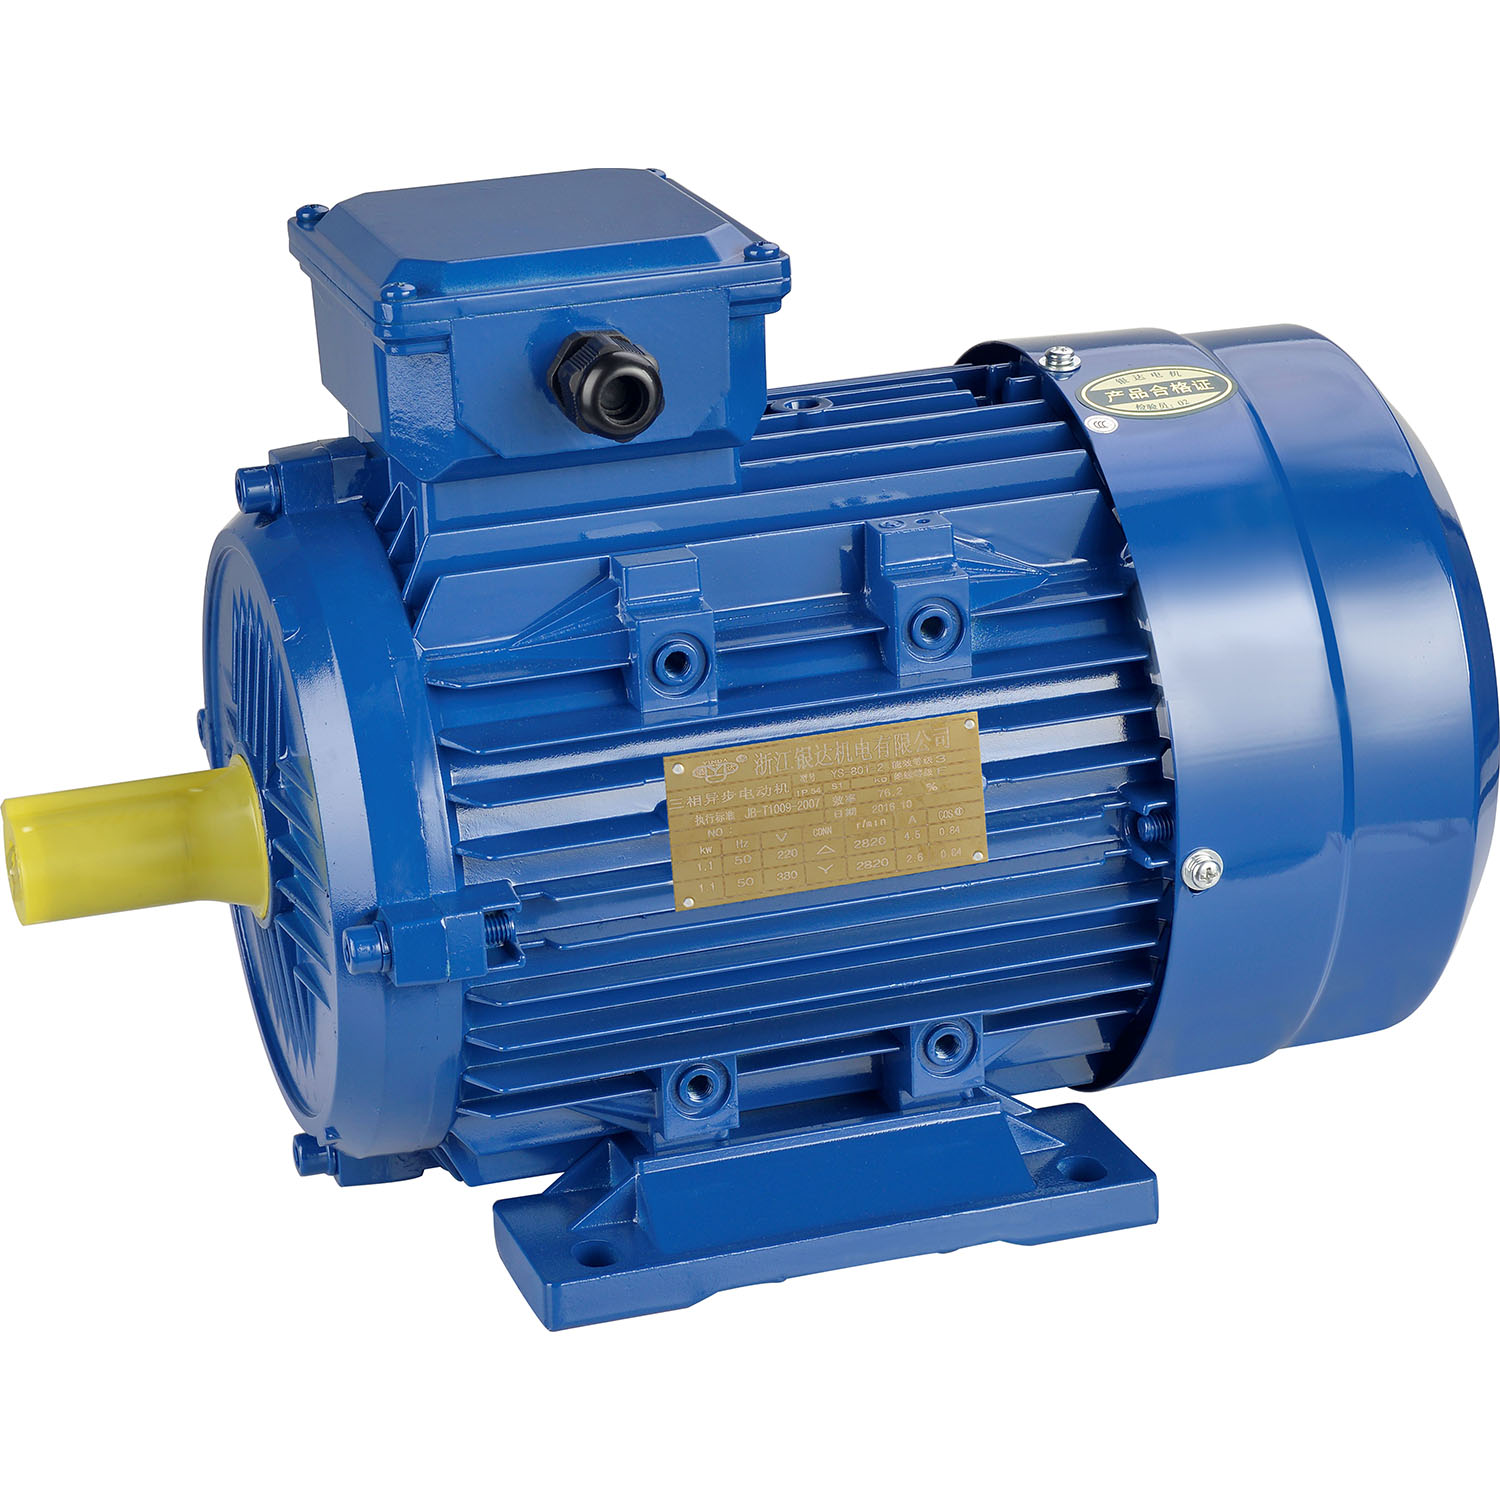 YS-631-2 0.18KW 0.25HP aluminum cylinder series high efficiency three-phase asynchronous motor